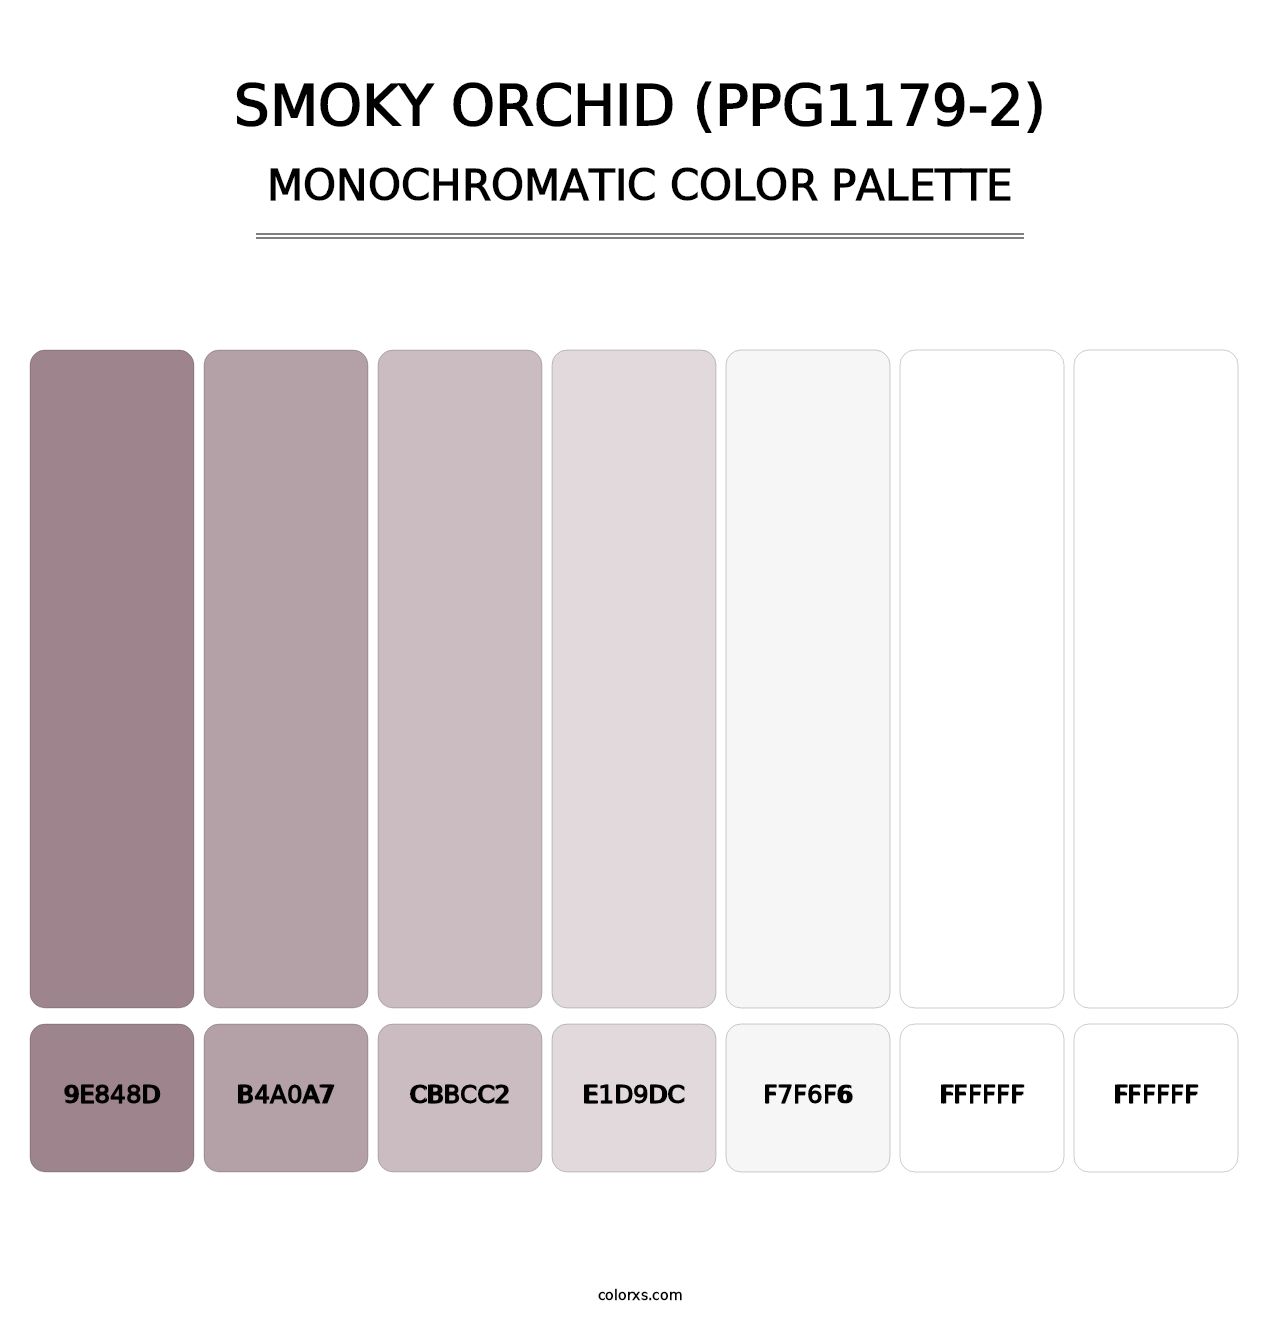 Smoky Orchid (PPG1179-2) - Monochromatic Color Palette